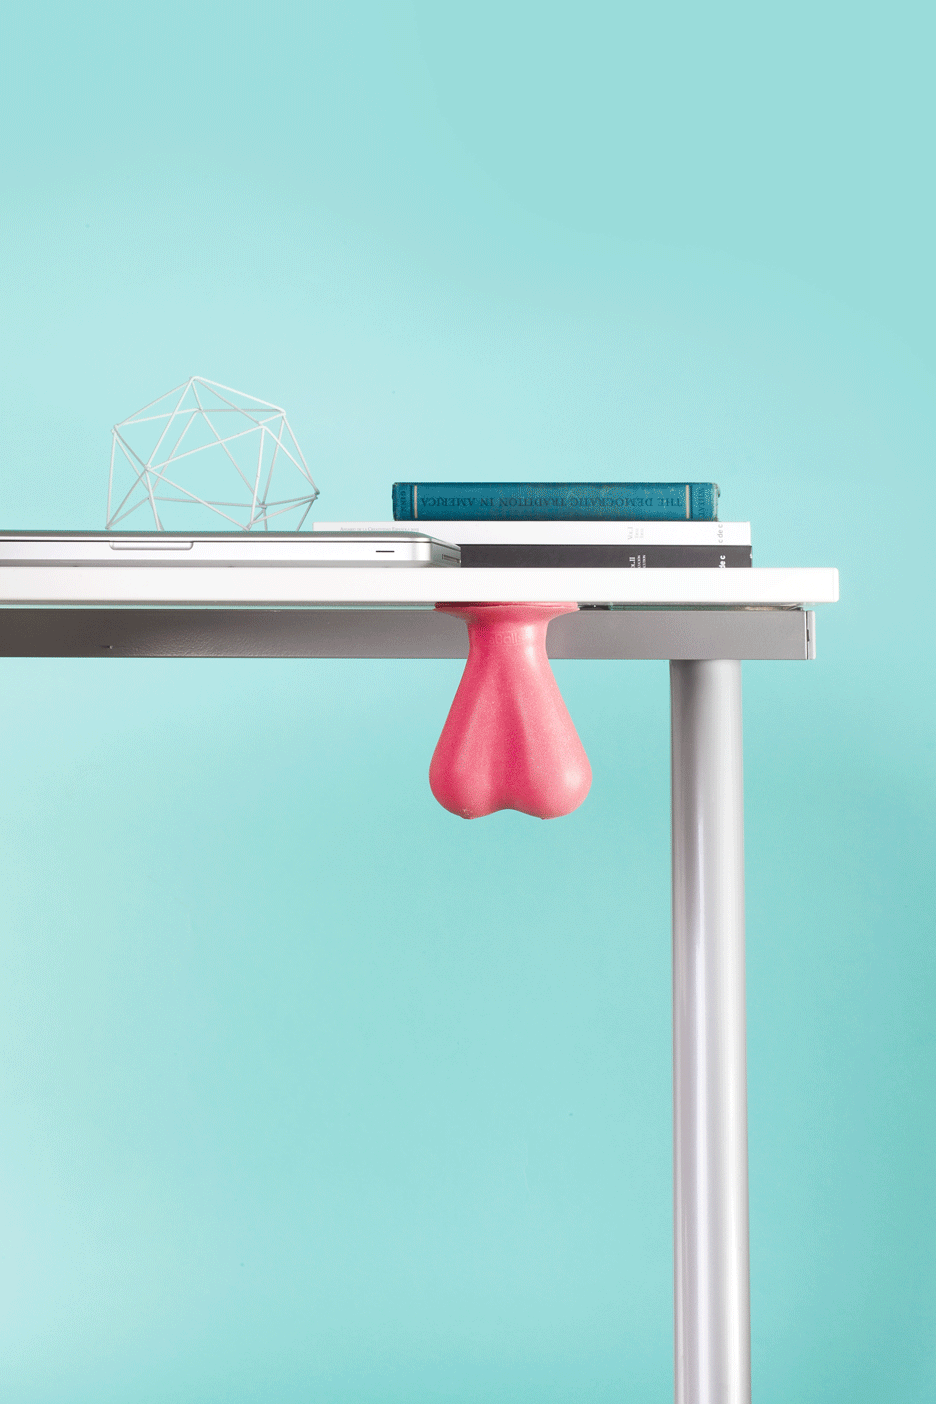 This Dangling Doohickey Lets You Be Productive While Playing With Your Balls